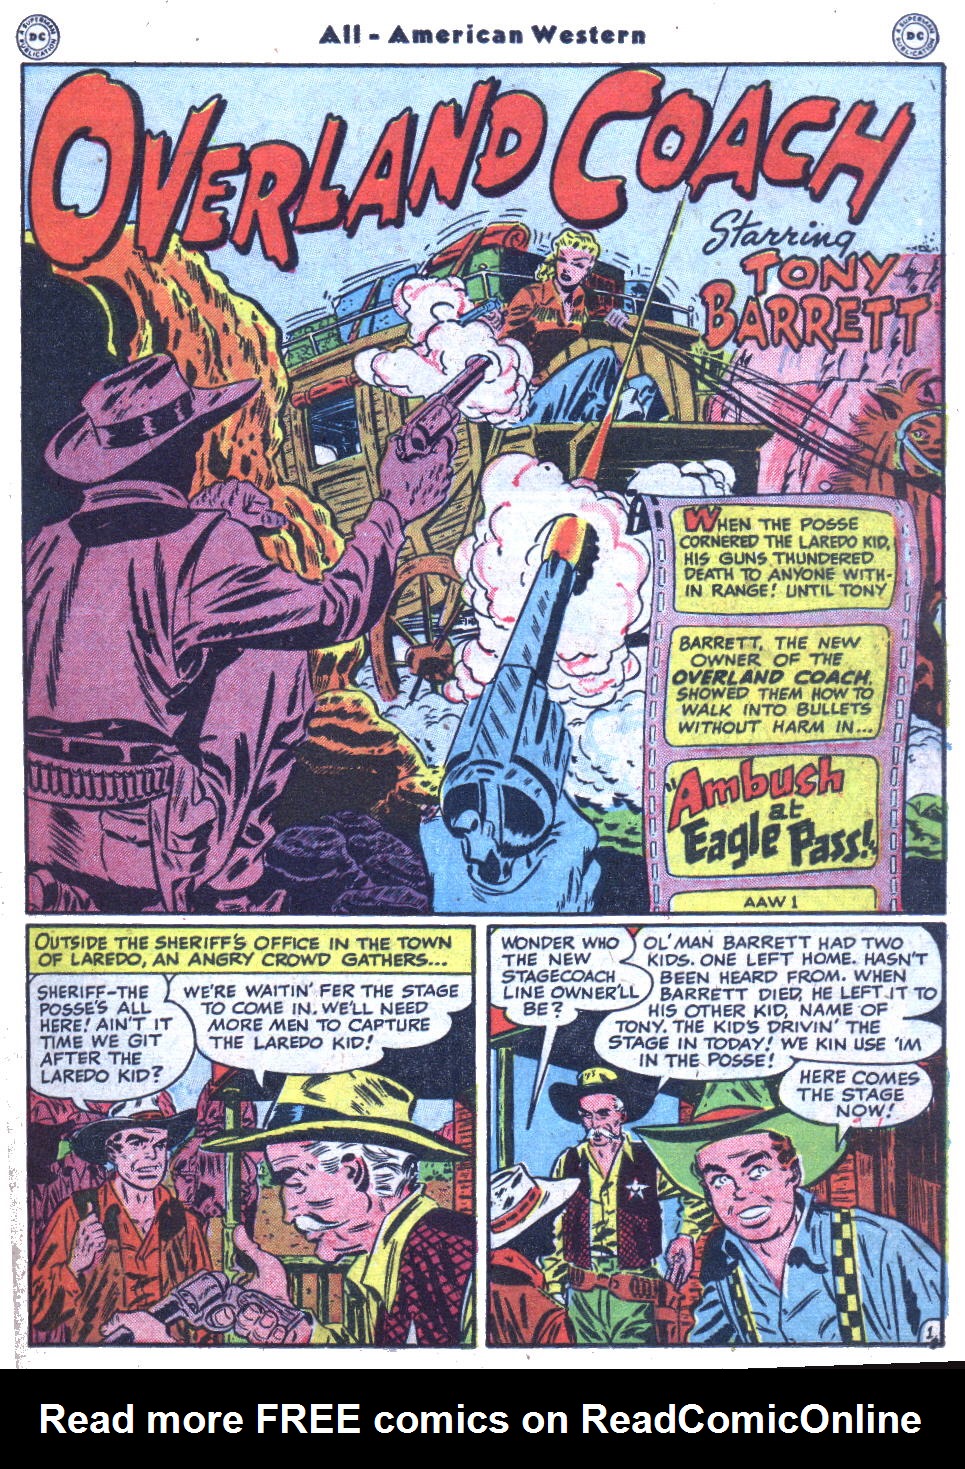 Read online All-American Western comic -  Issue #103 - 15